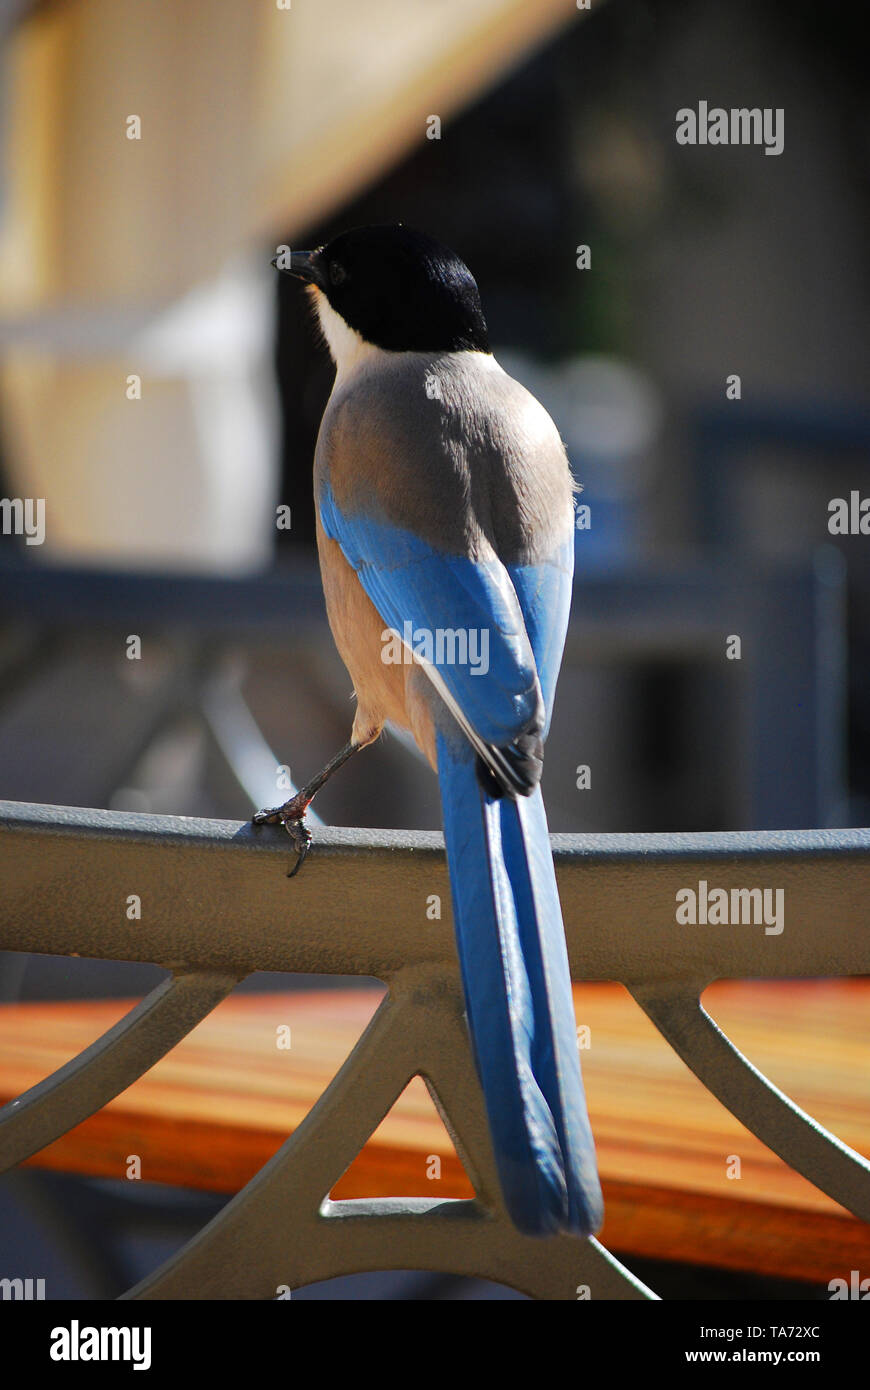 Blue Magpie Waiting for Food in a Restaurant Stock Photo